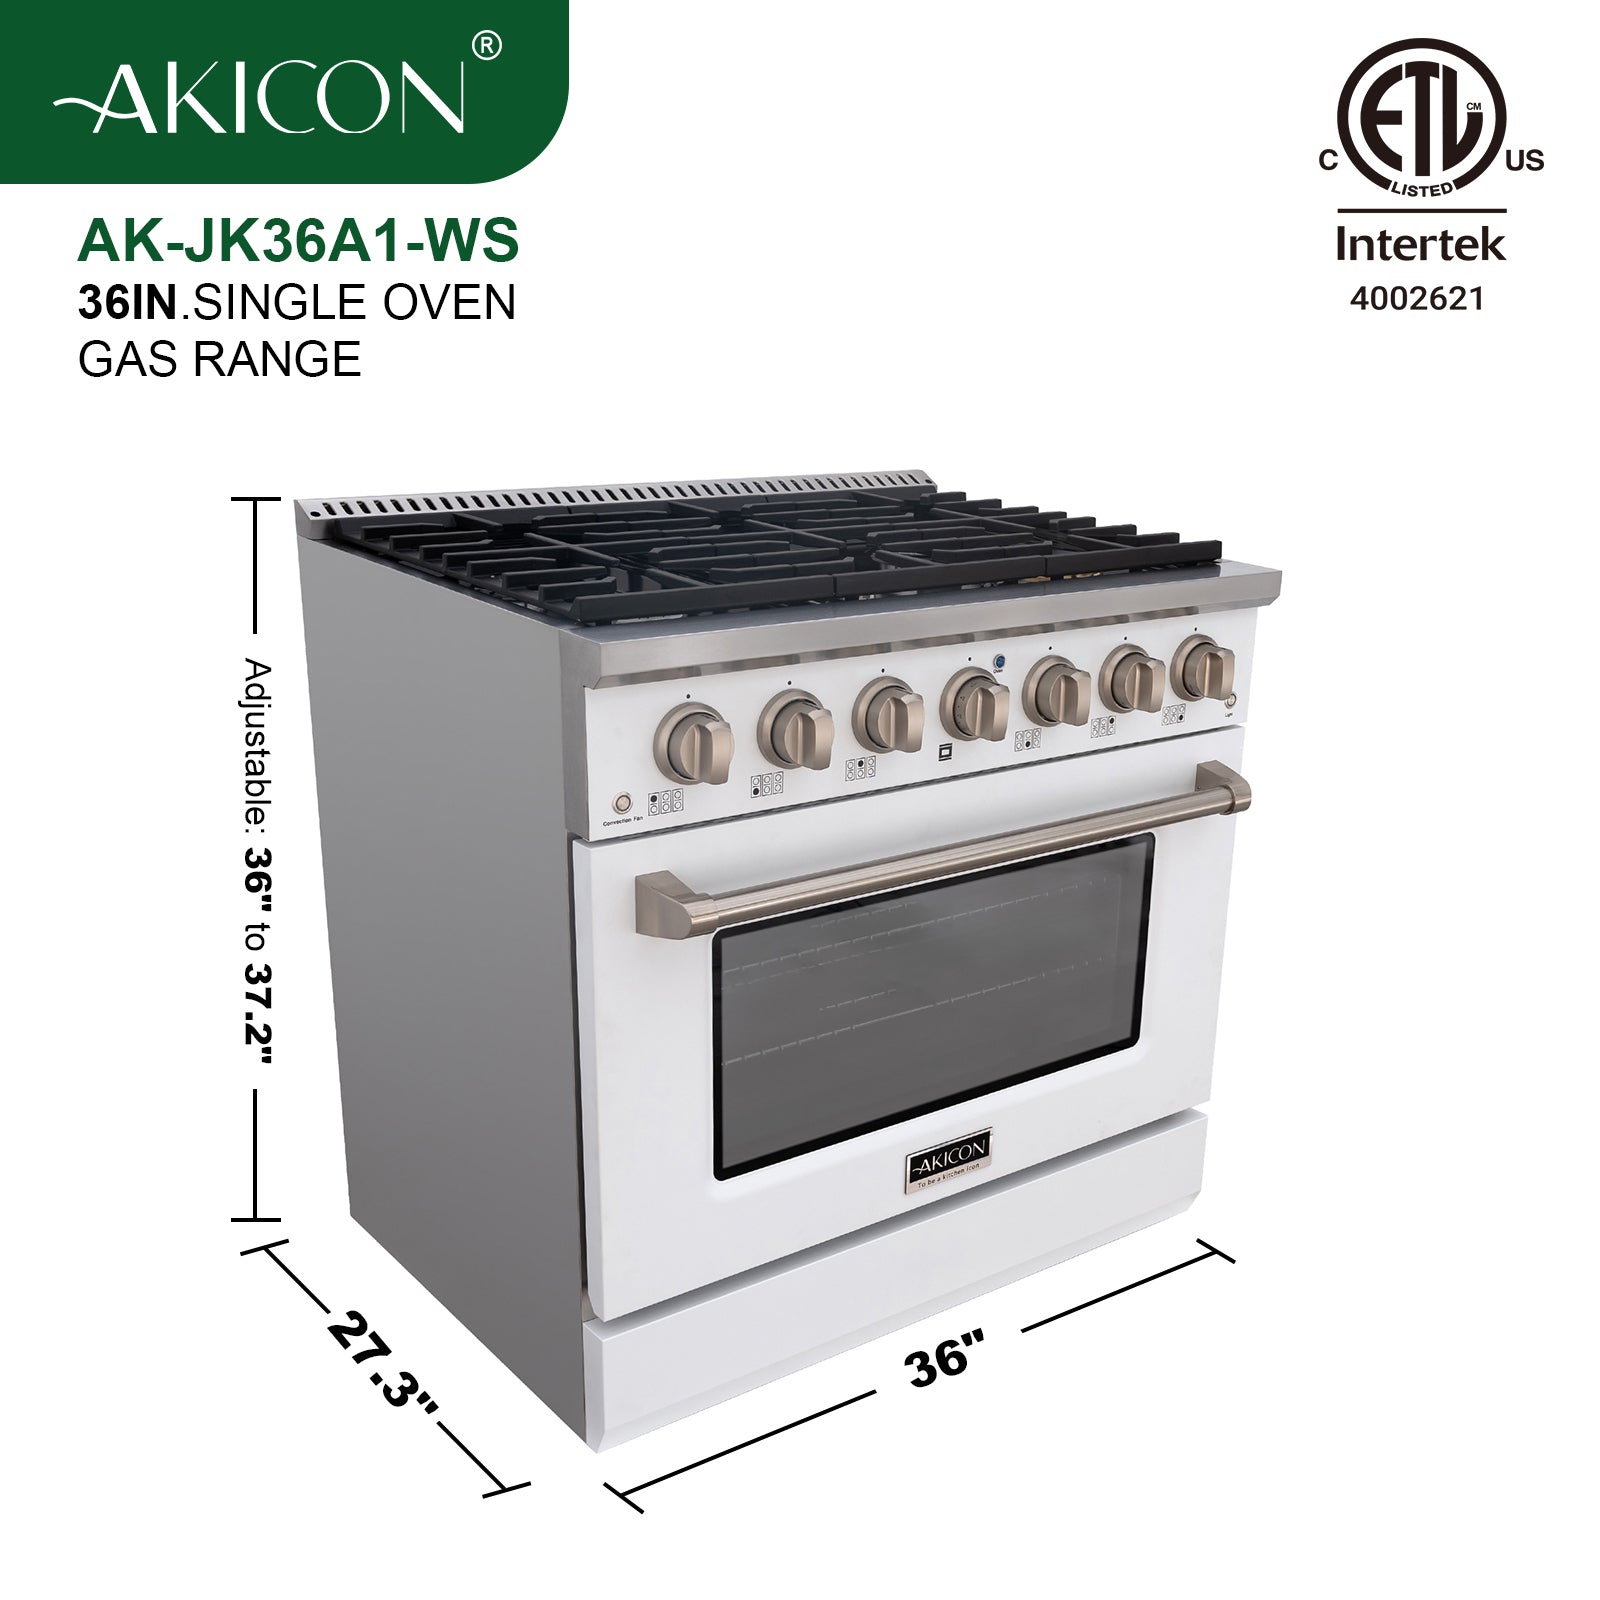 Akicon 36" Slide-in Freestanding Professional Style Gas Range with 5.2 Cu. Ft. Oven, 6 Burners, Convection Fan, Cast Iron Grates. White & Stainless Steel